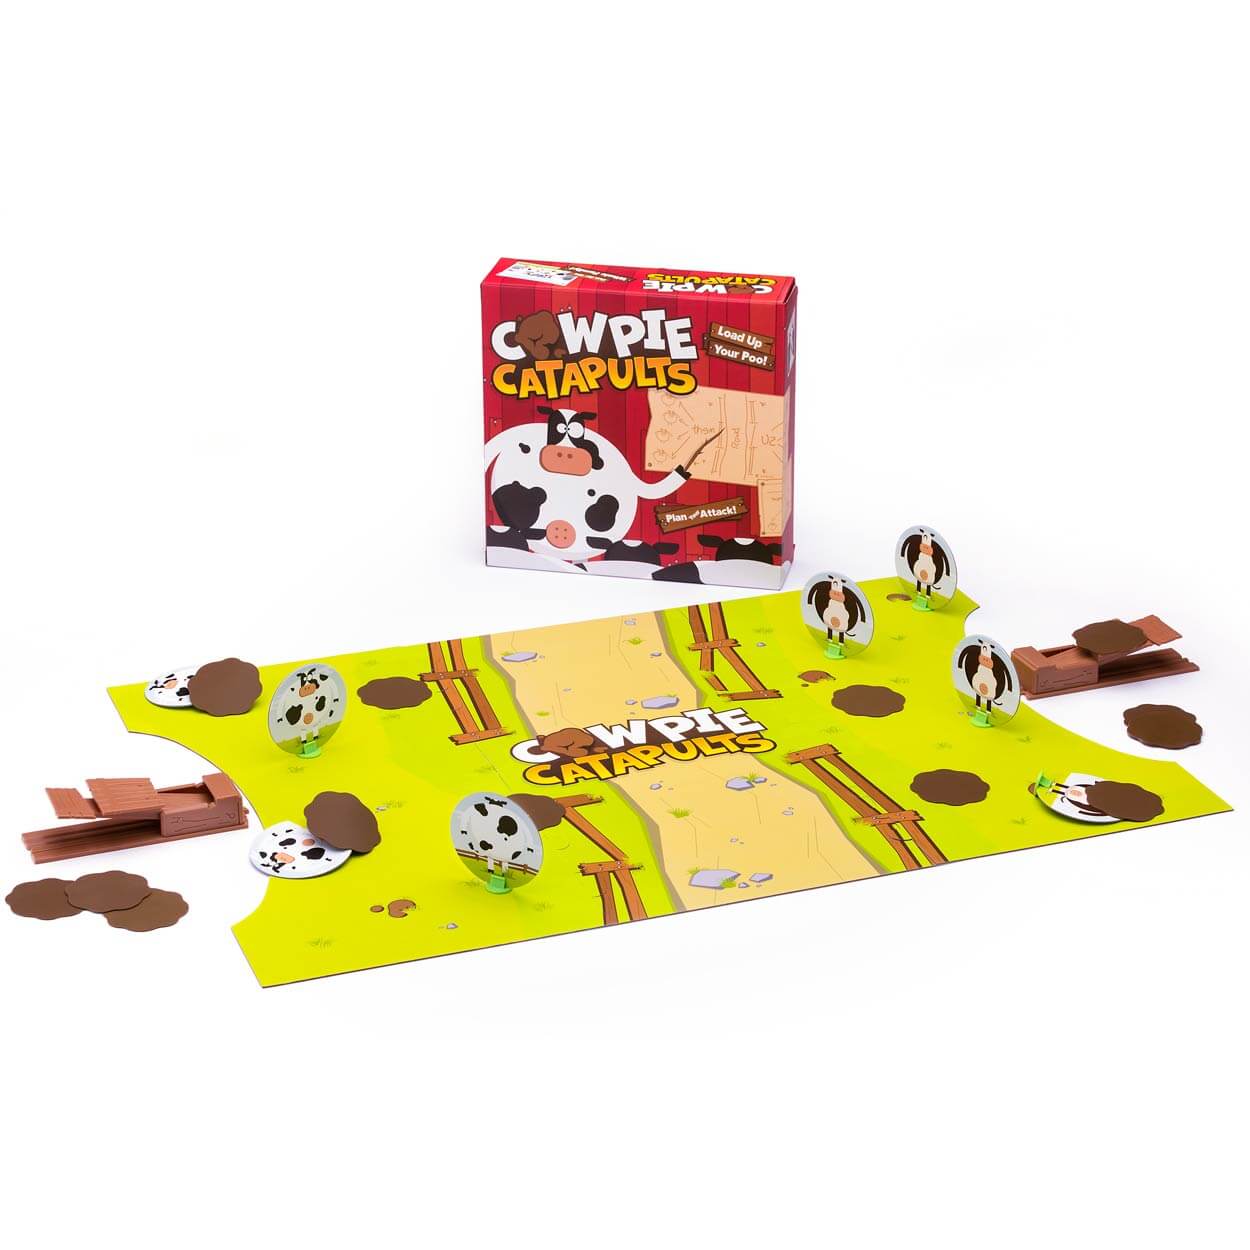 Cowpie Catapults Game